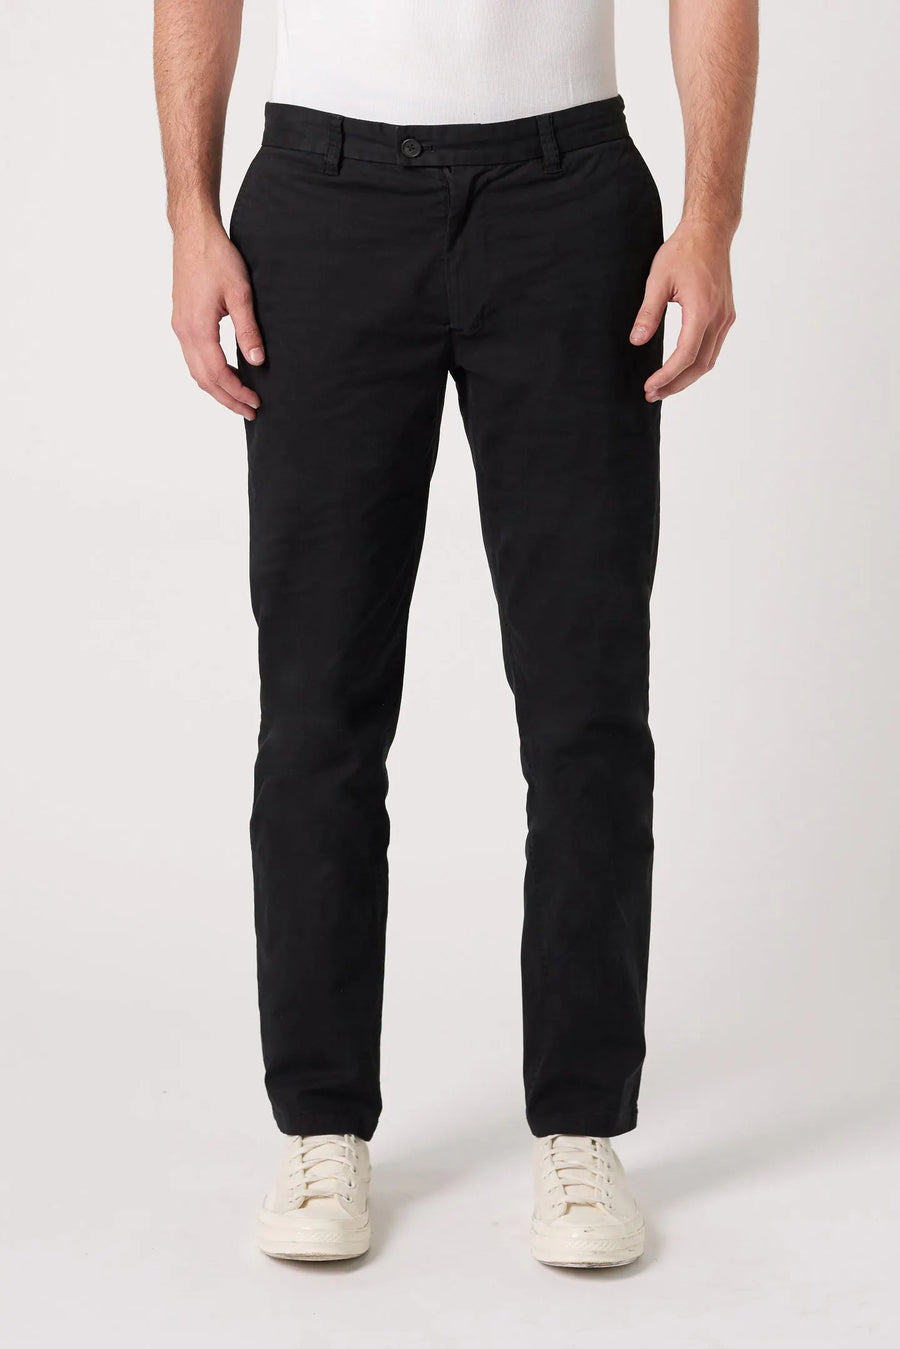 Cash Washed Twill Pant